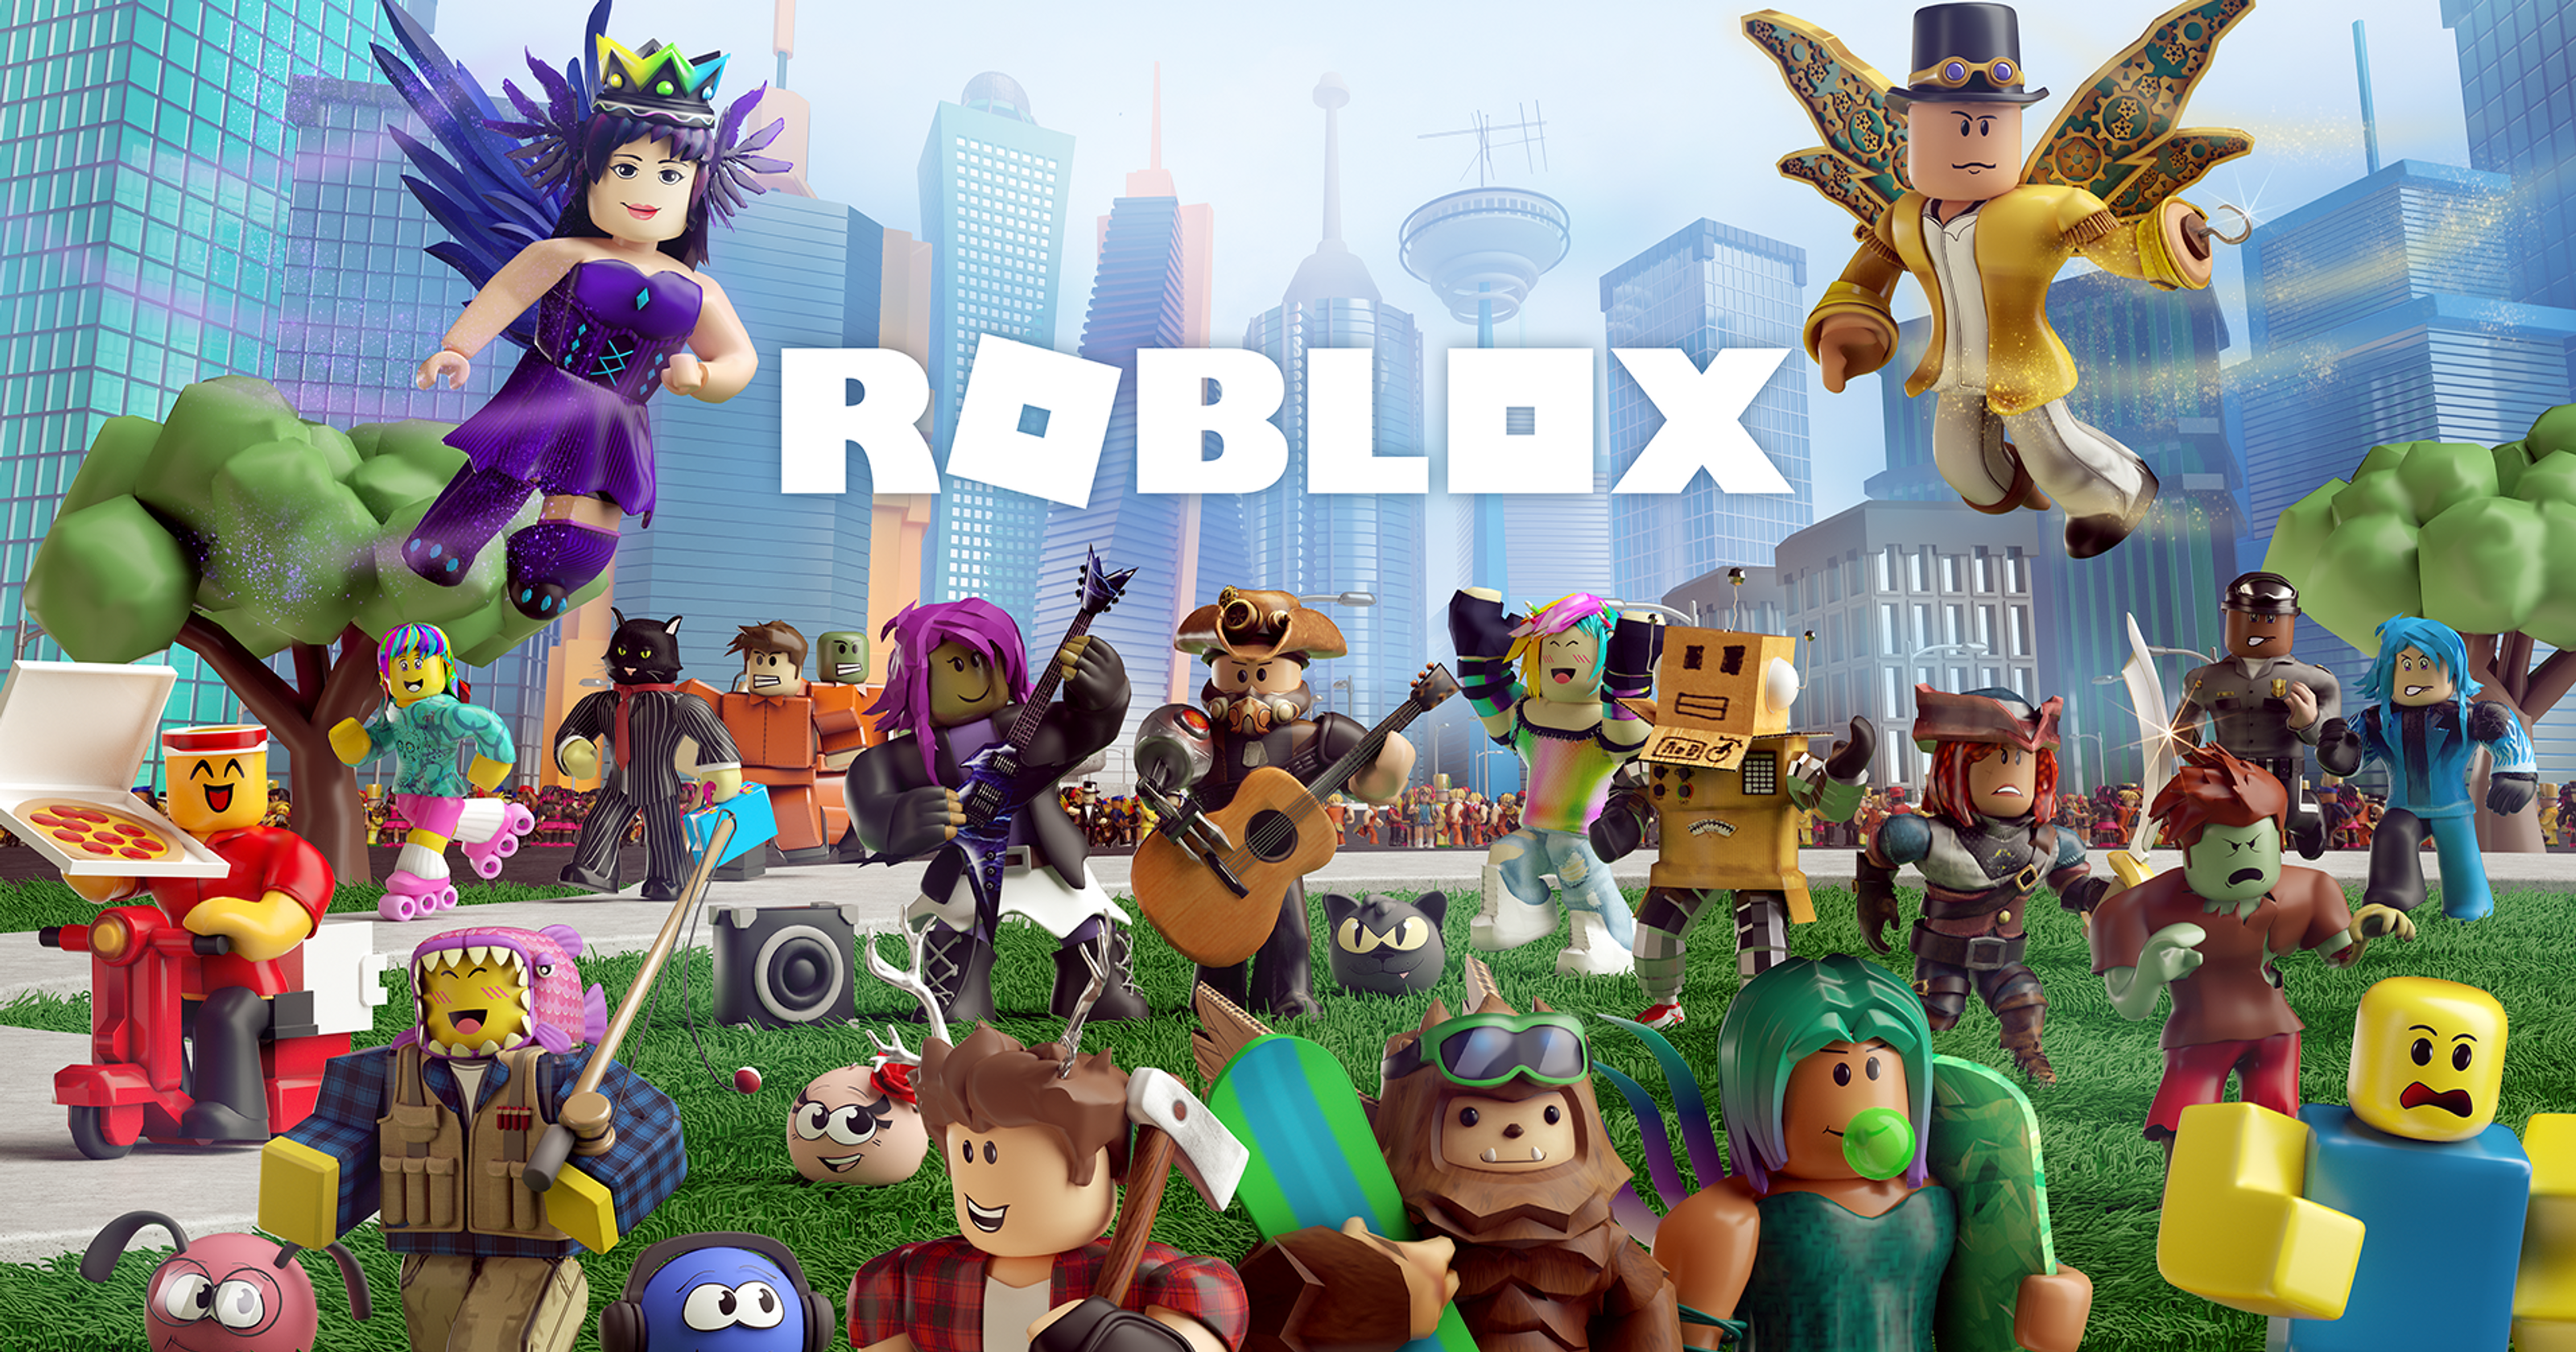 This College Student Is Paying His Tuition By Creating Roblox Games Steemit - roblox asimo3089 and badcc